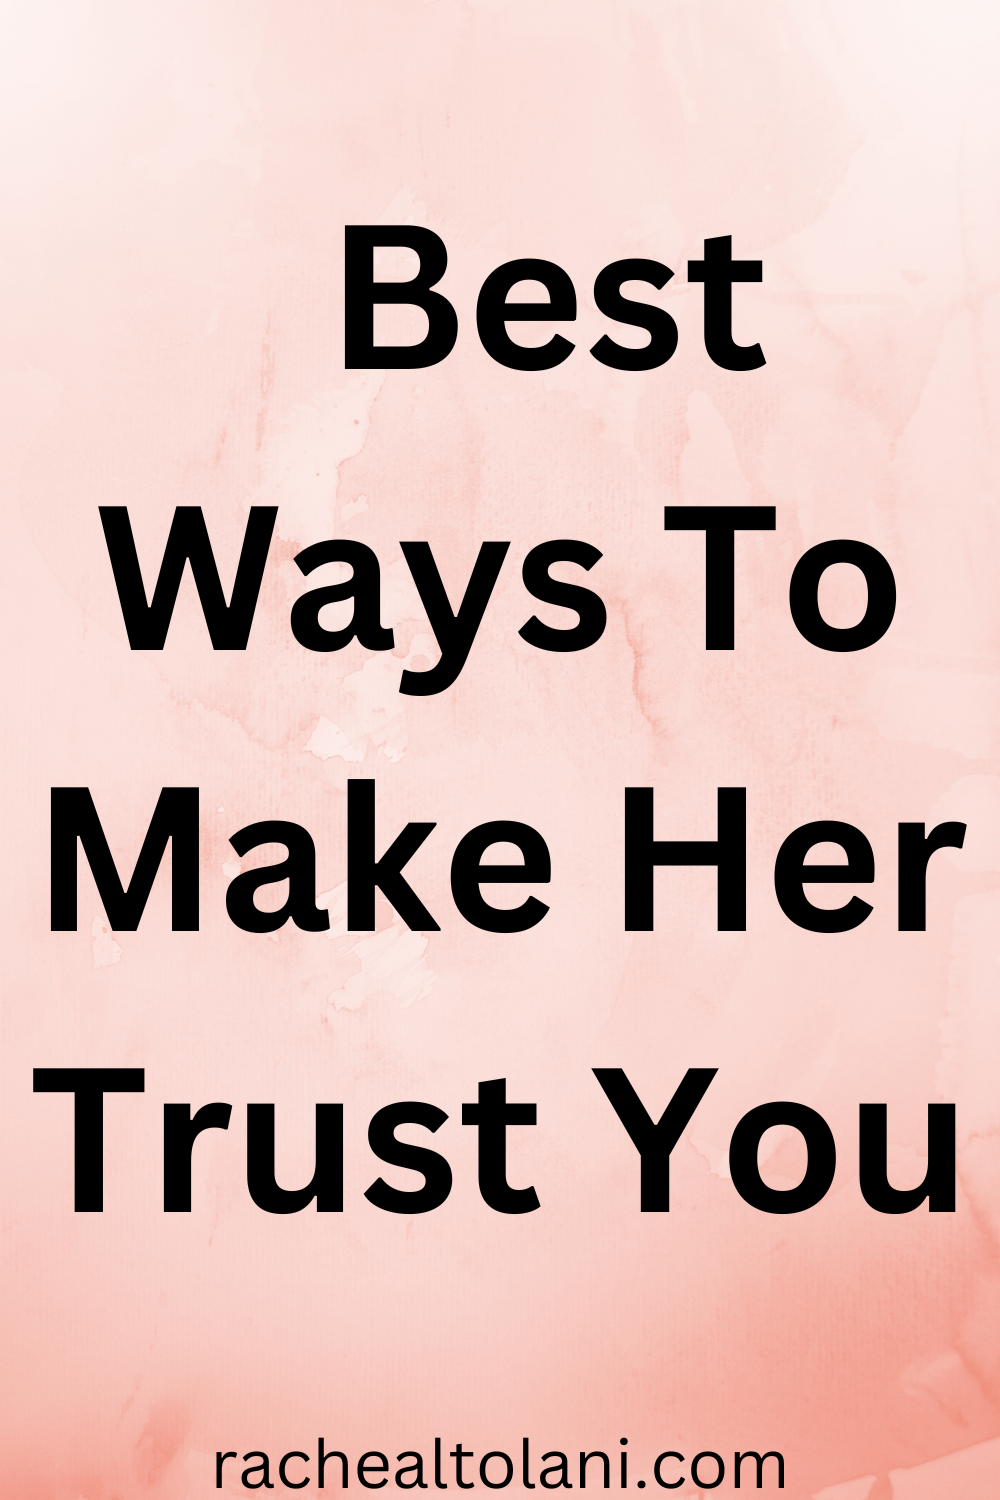 Words to make her trust you